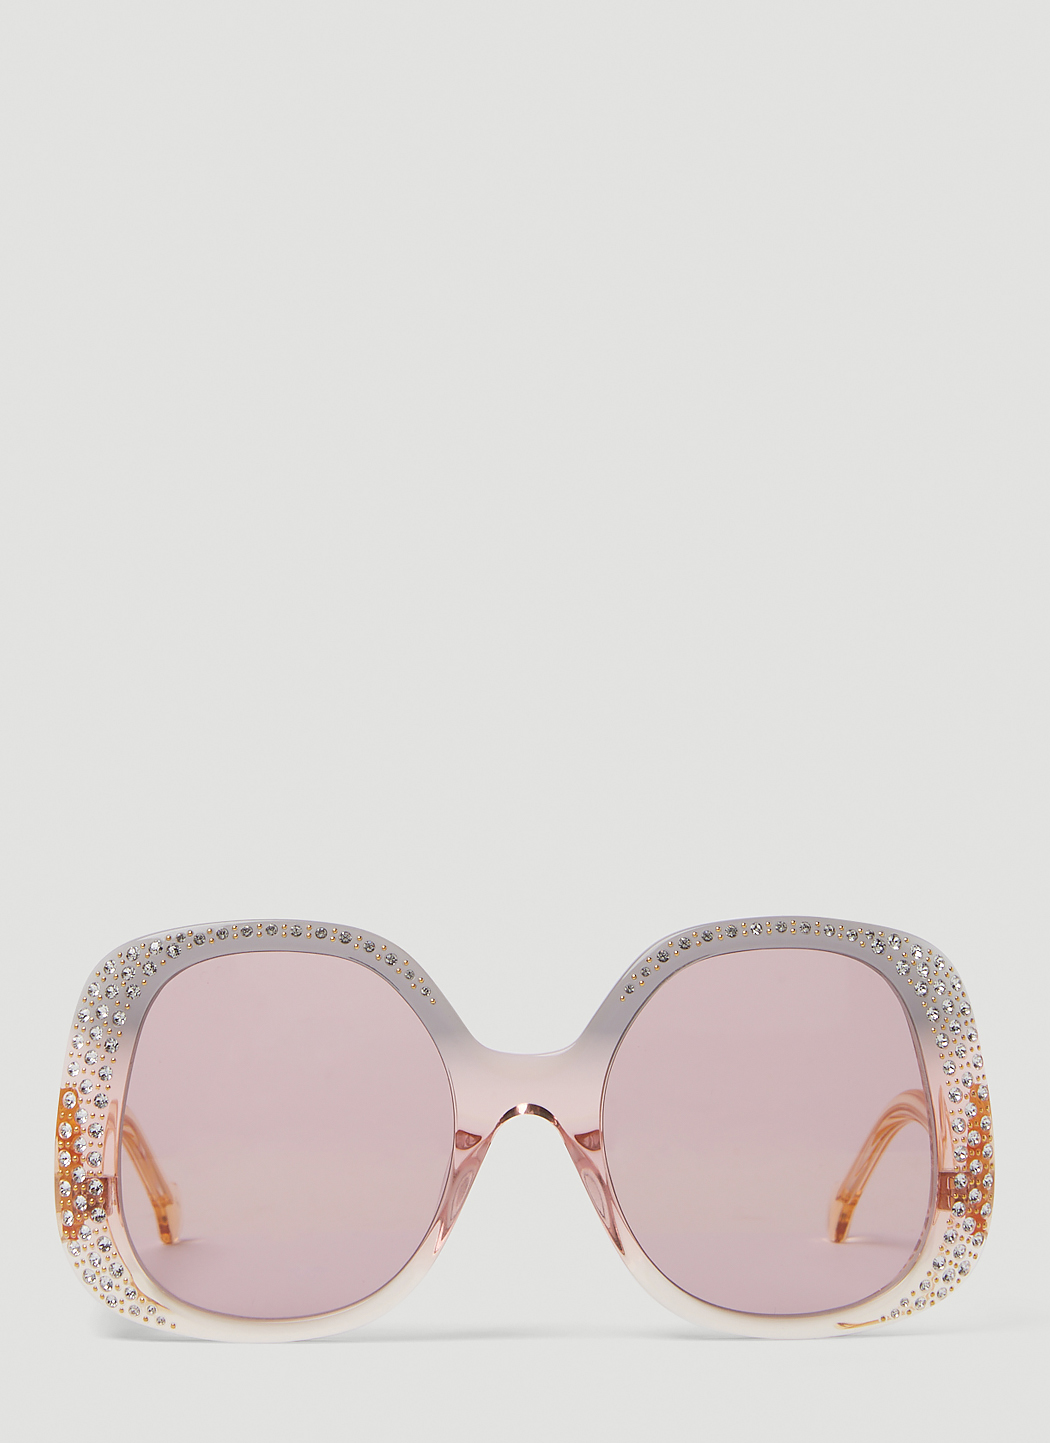 Gucci Women's Pink Sunglasses on Sale with Cash Back | ShopStyle